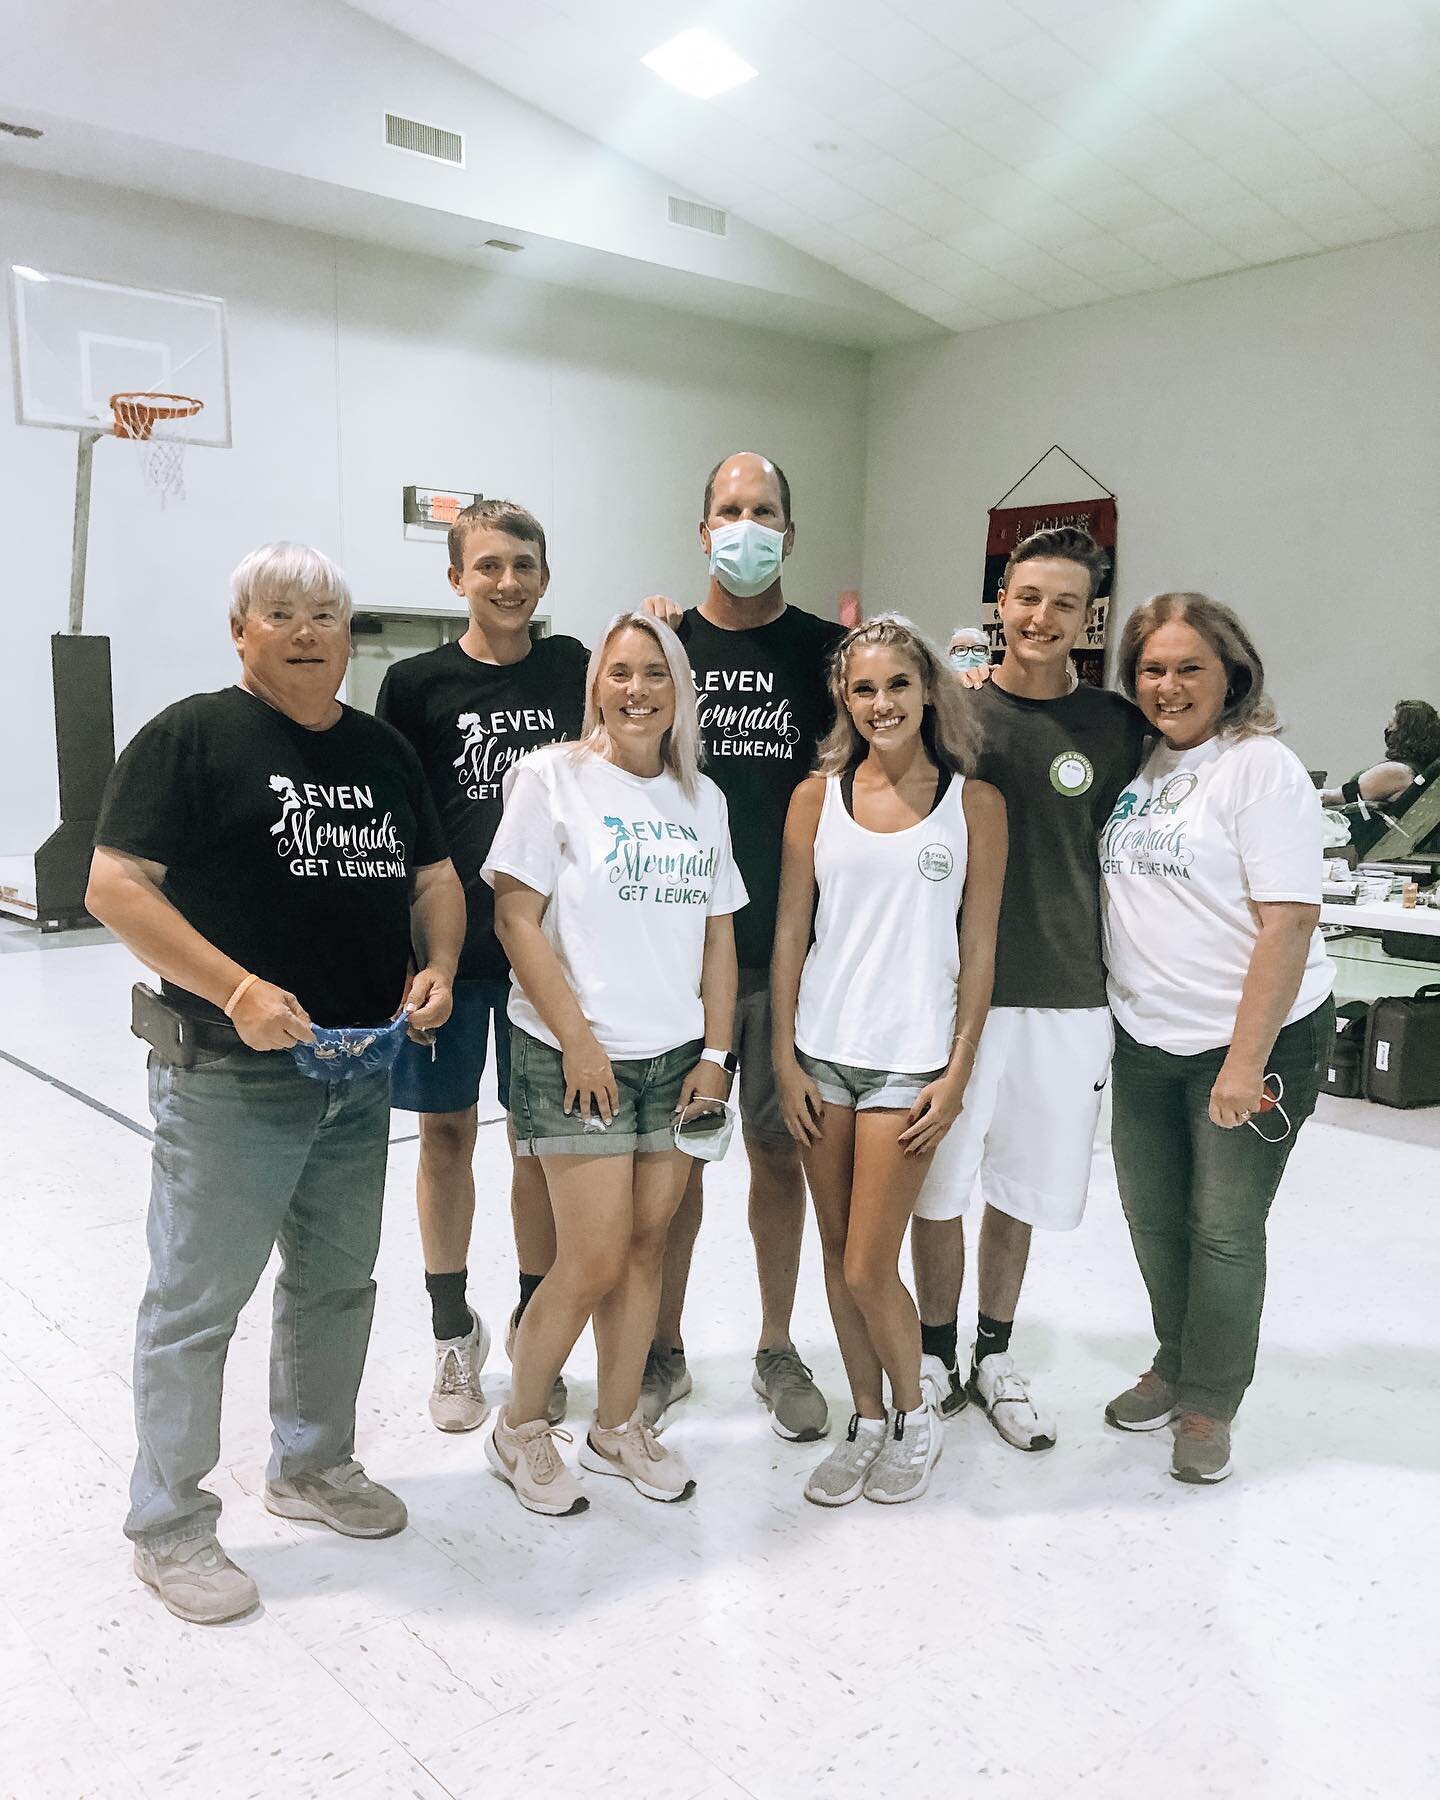 Thank you to everybody that donated and helped at our blood drive! We were able to collect 37 units of whole blood, saving up to 111 lives! 
.
Big shoutout to my dad @soderstrom_scott for reaching his 1 gallon blood donation mark as well! 
.
P.S. Don